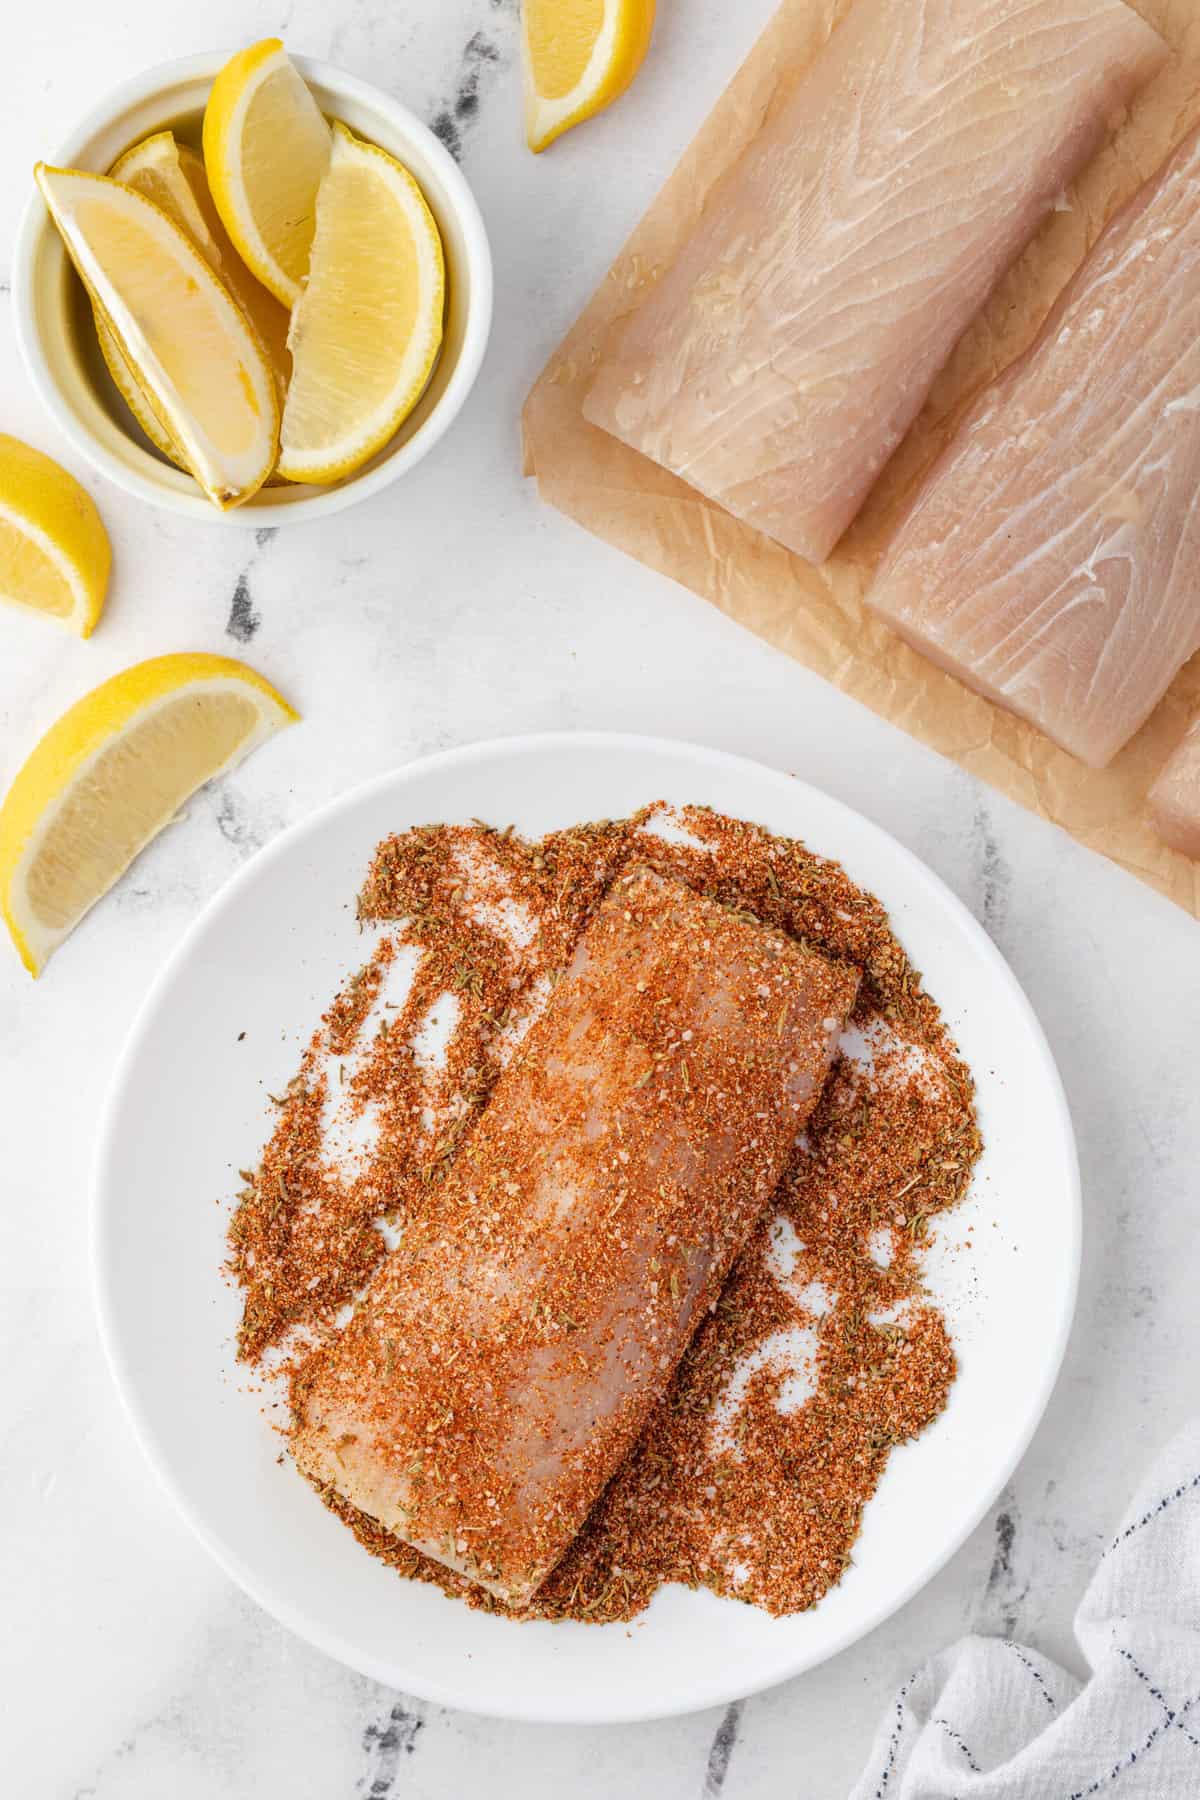 A piece of fish is being coated in seasoning on a white plate.